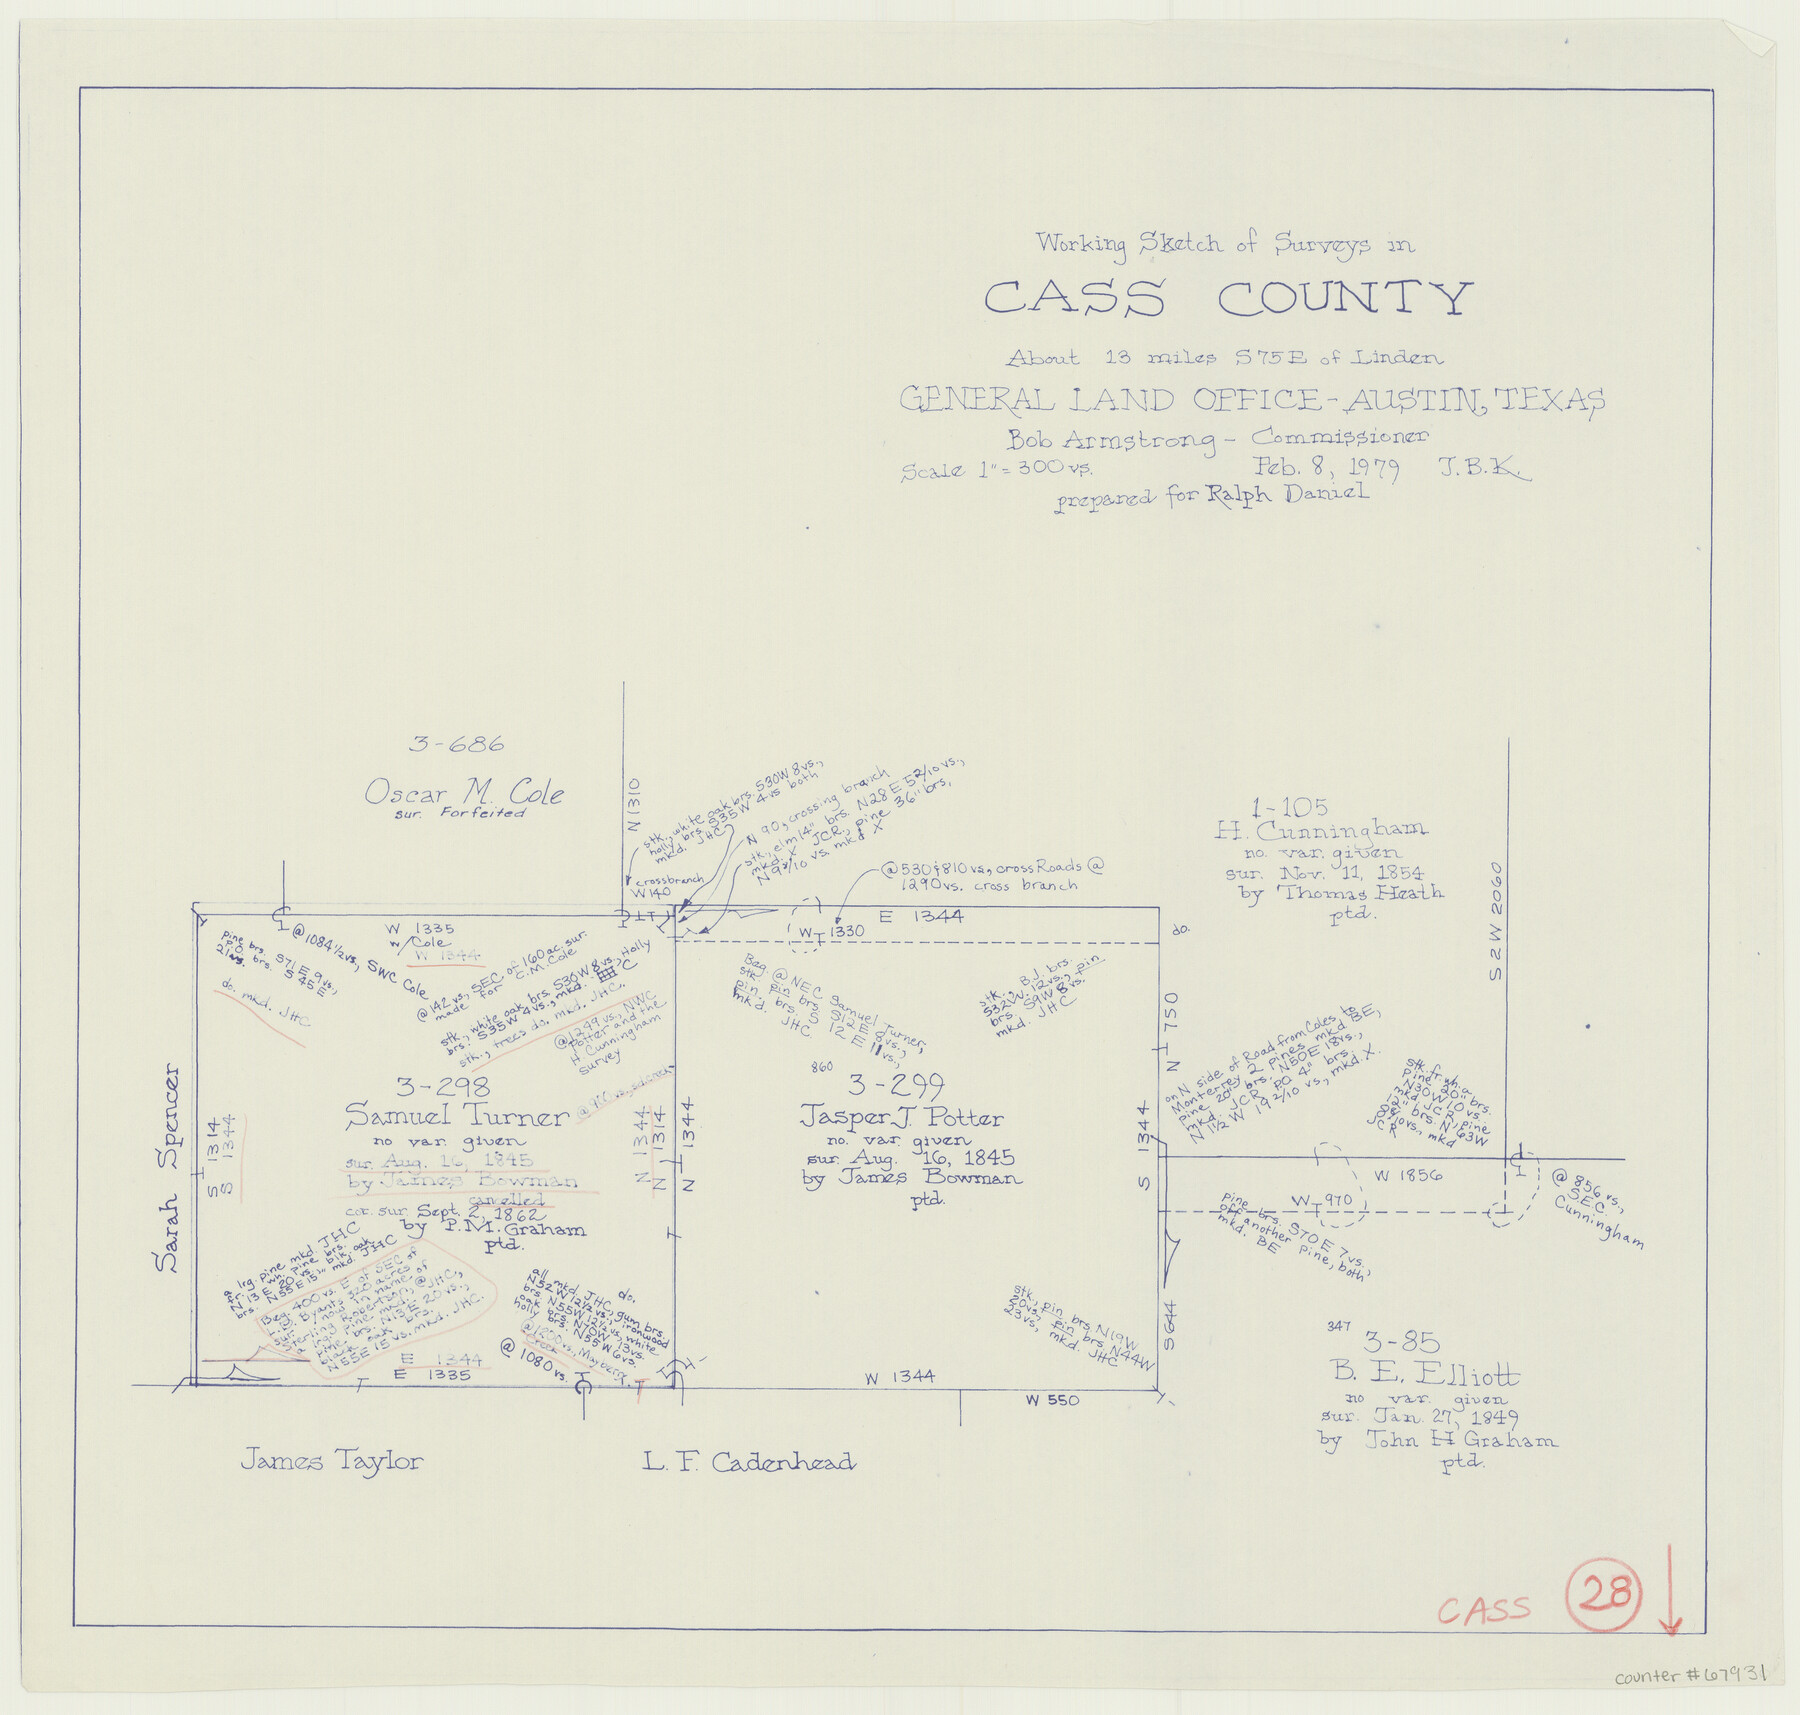 67931, Cass County Working Sketch 28, General Map Collection